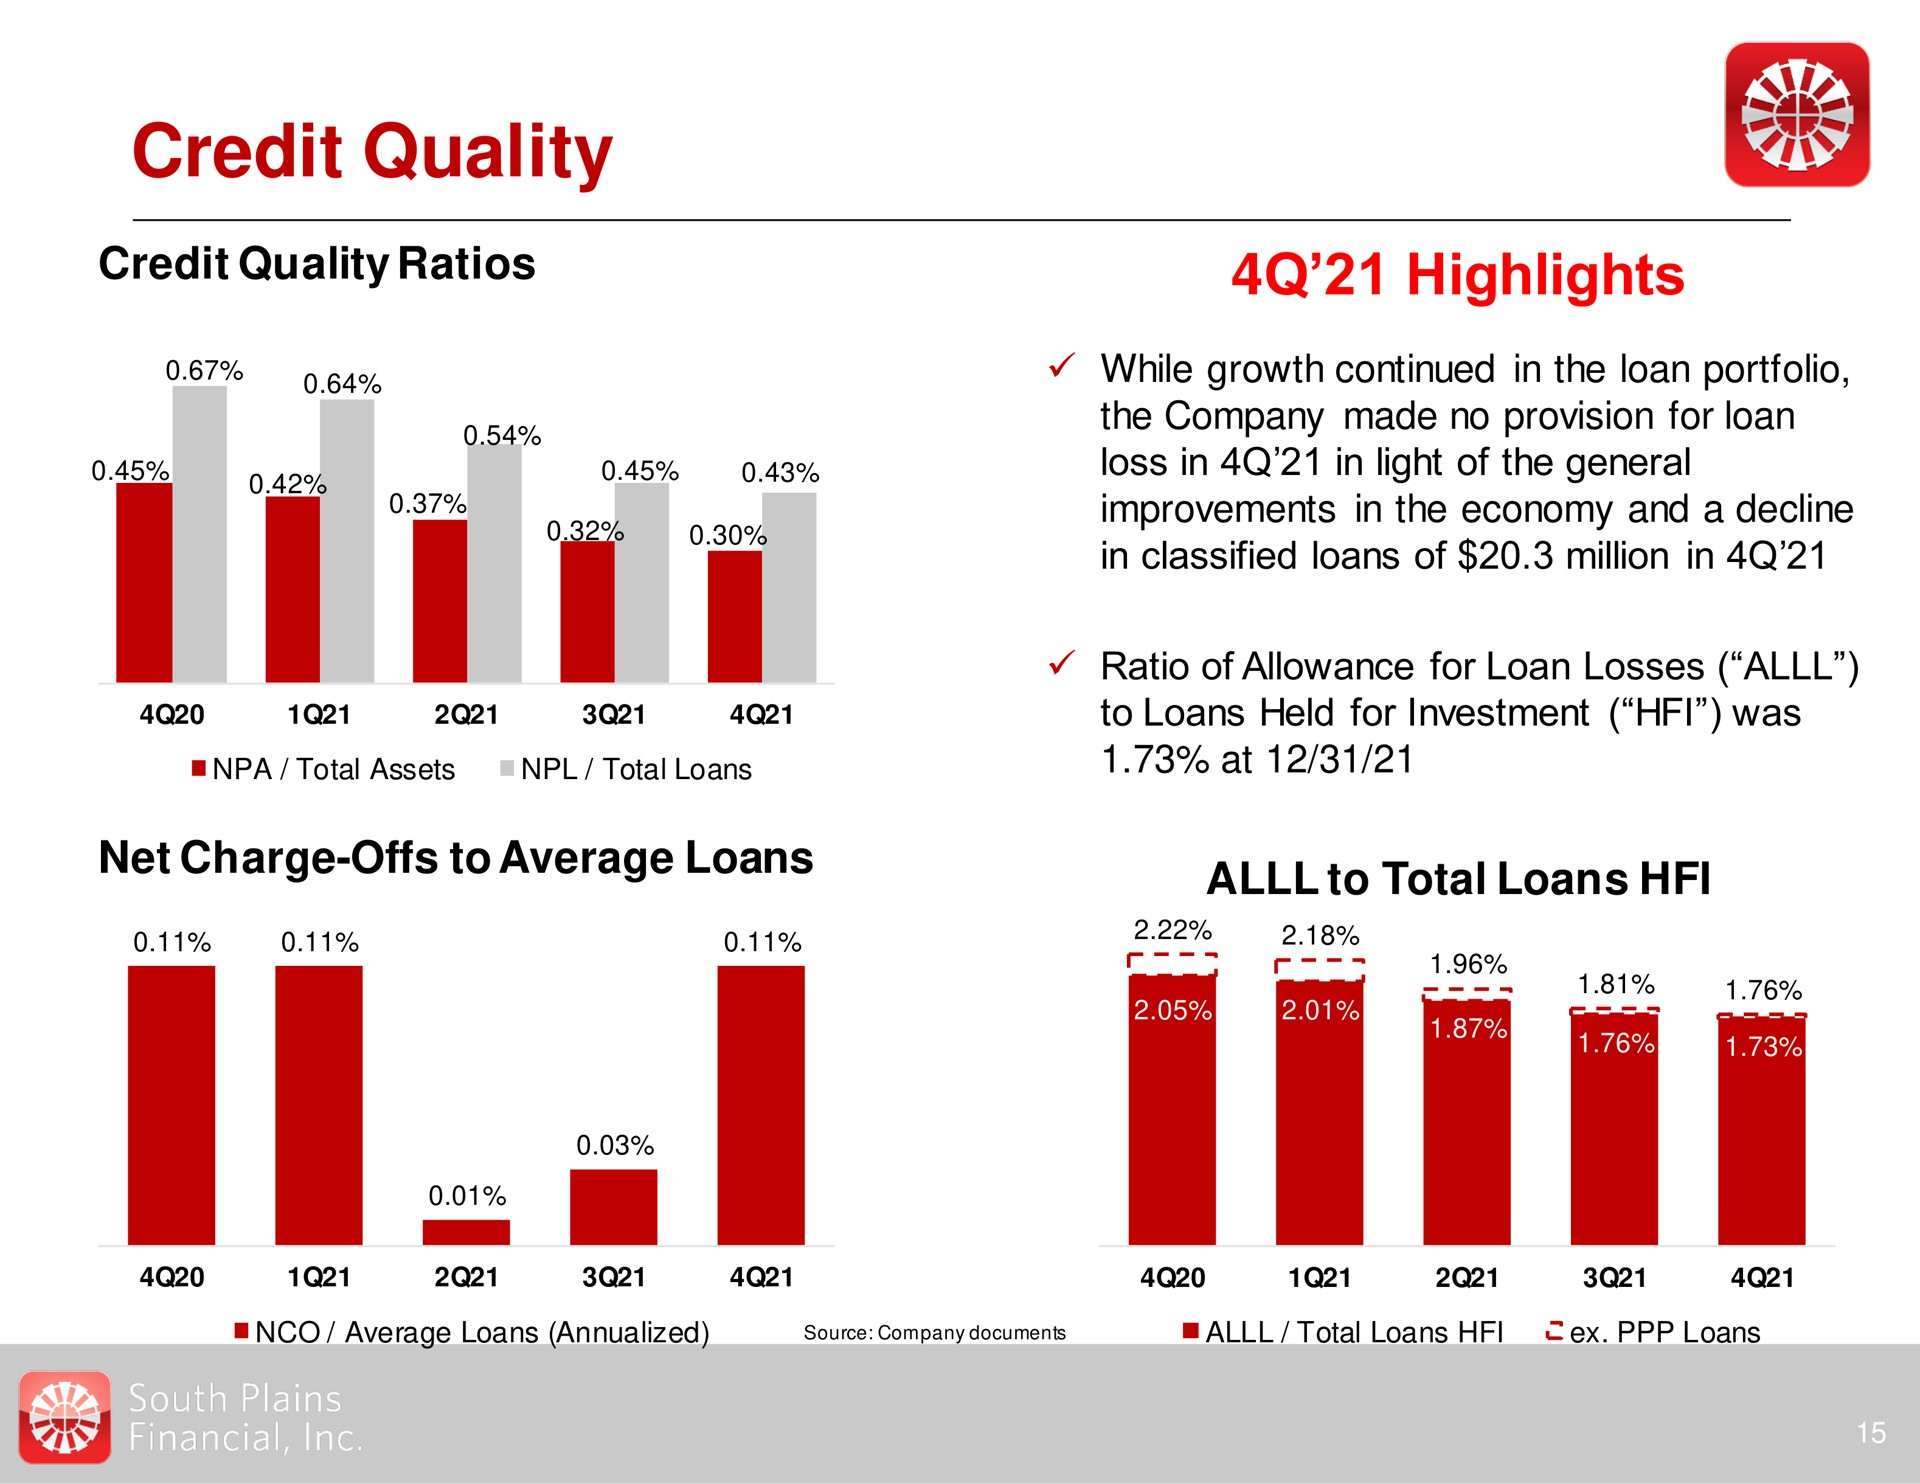 credit quality highlights | South Plains Financial